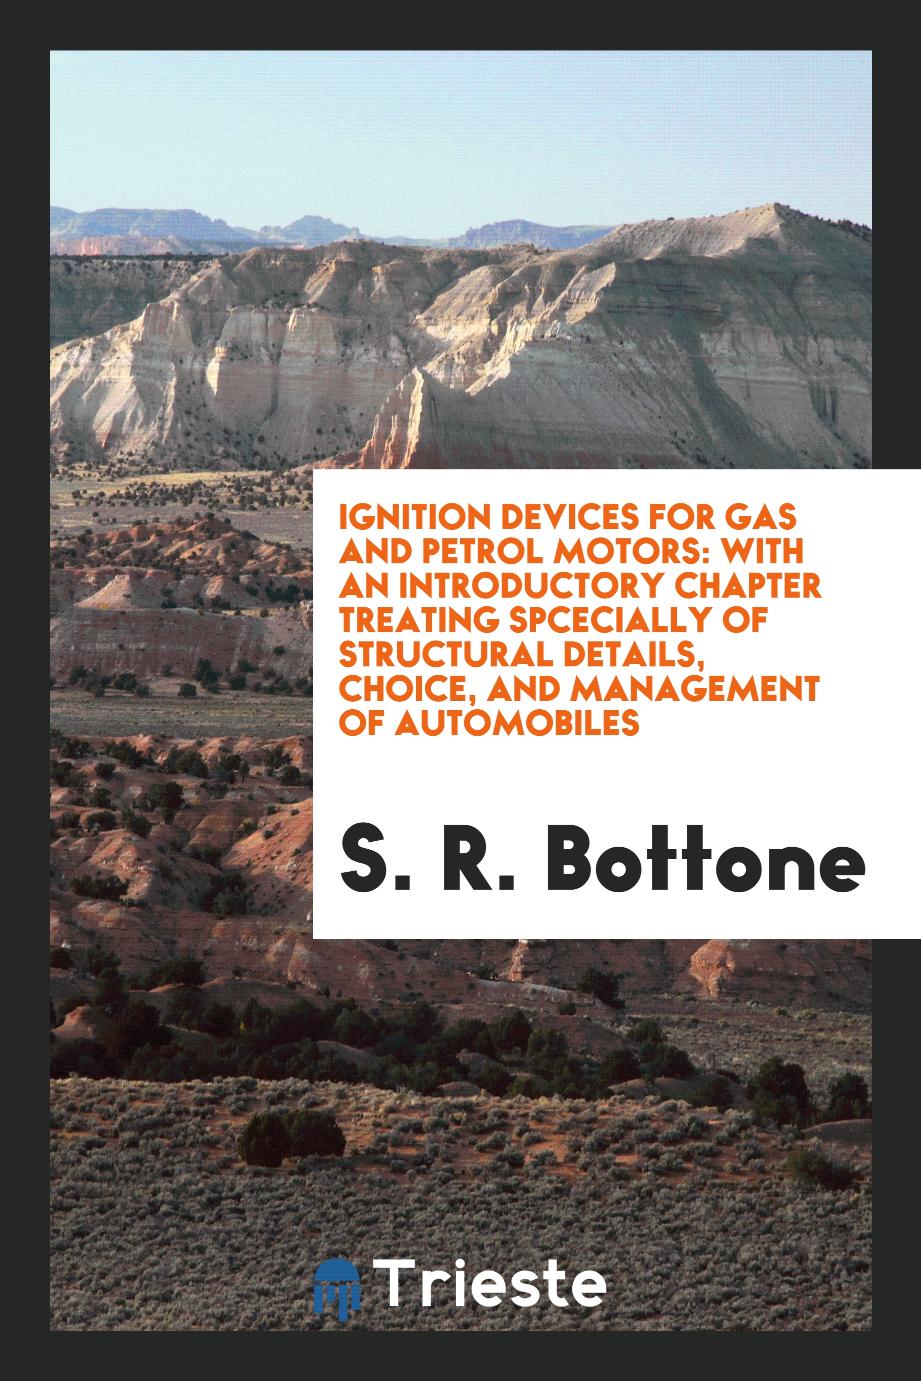 Ignition Devices for Gas and Petrol Motors: With an Introductory Chapter Treating Spcecially of Structural Details, Choice, and Management of Automobiles